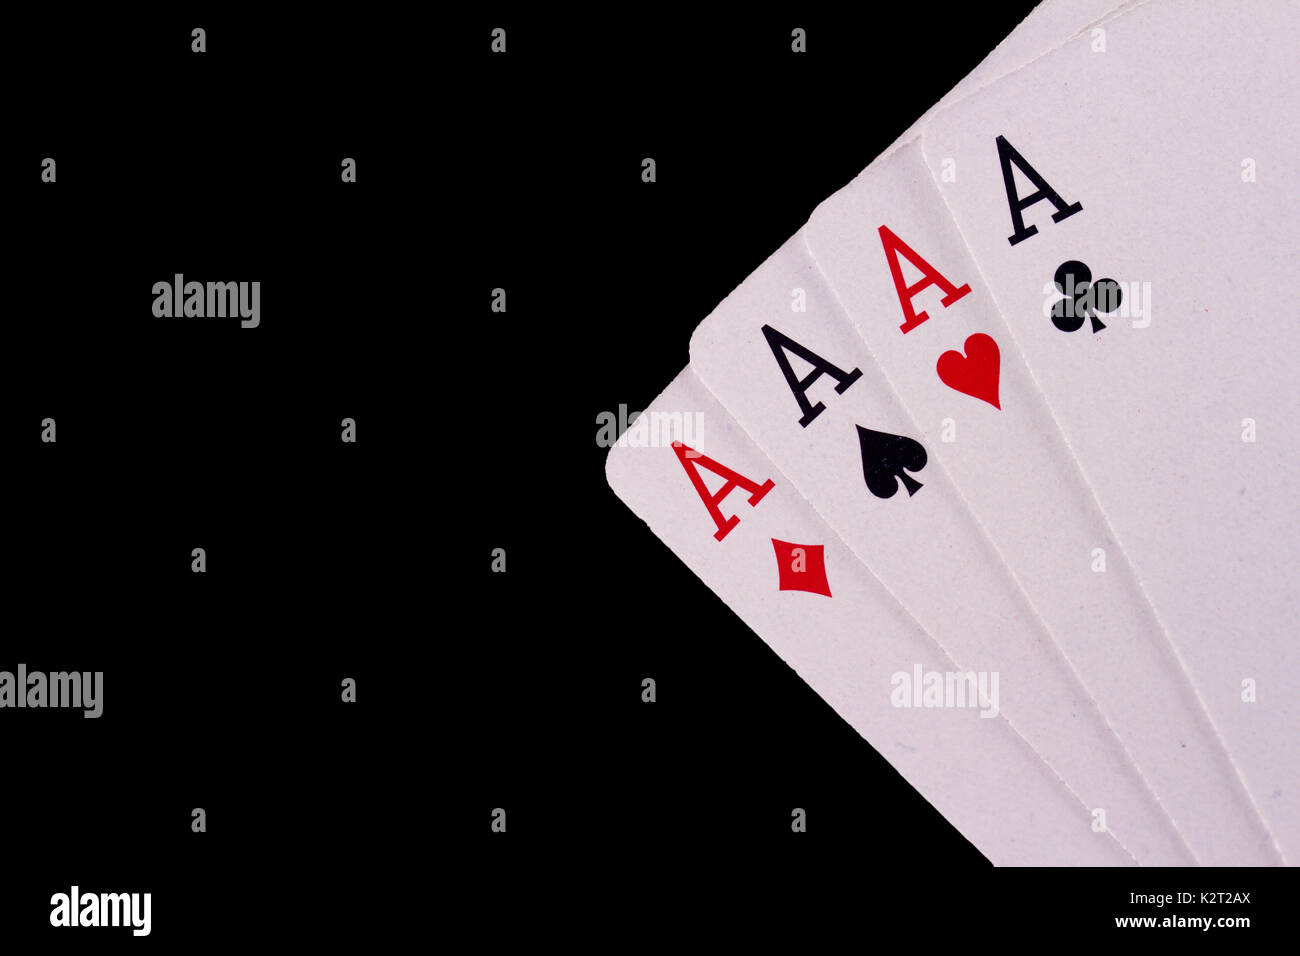 Four Aces playing cards set against a black background. Stock Photo